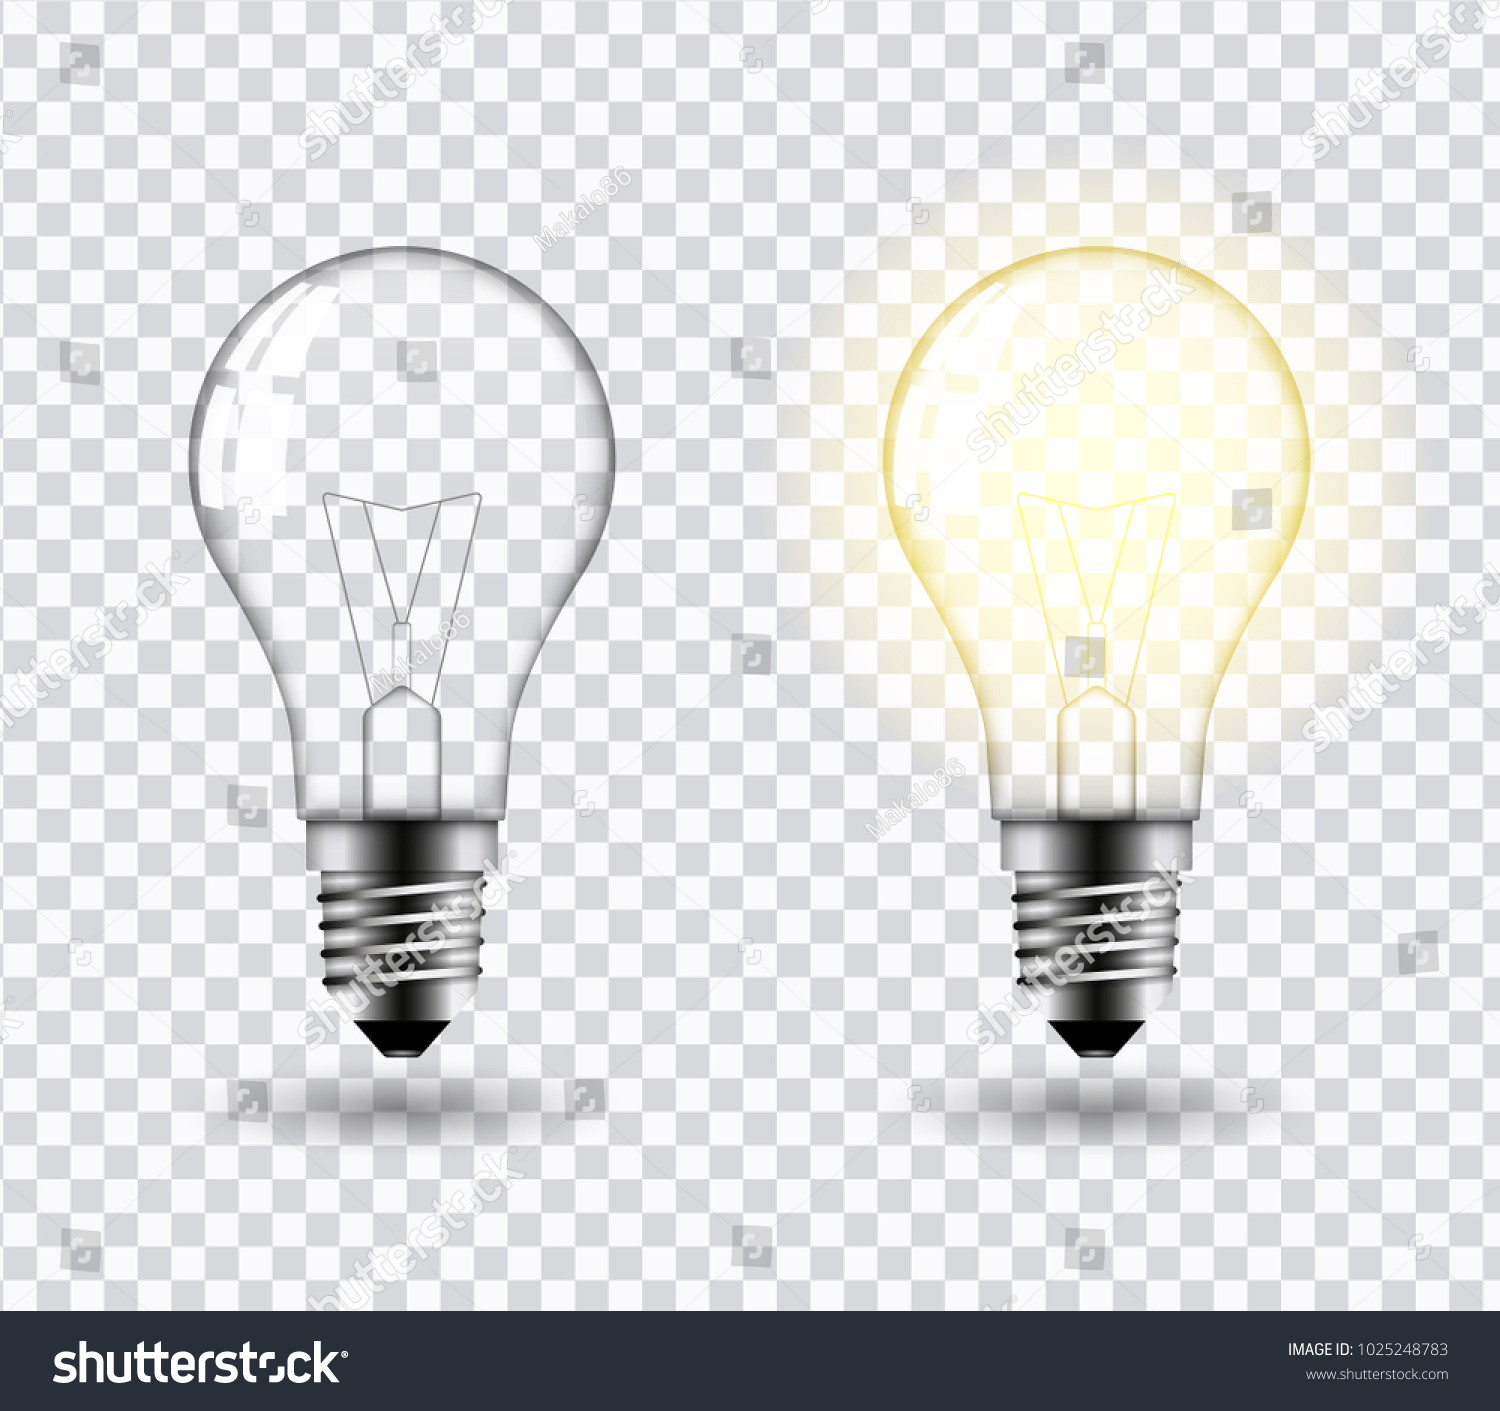 Vector image of a light bulb. Realistic 3d object on a transparent background. The effect of light. The symbol of creativity and ideas. #1025248783